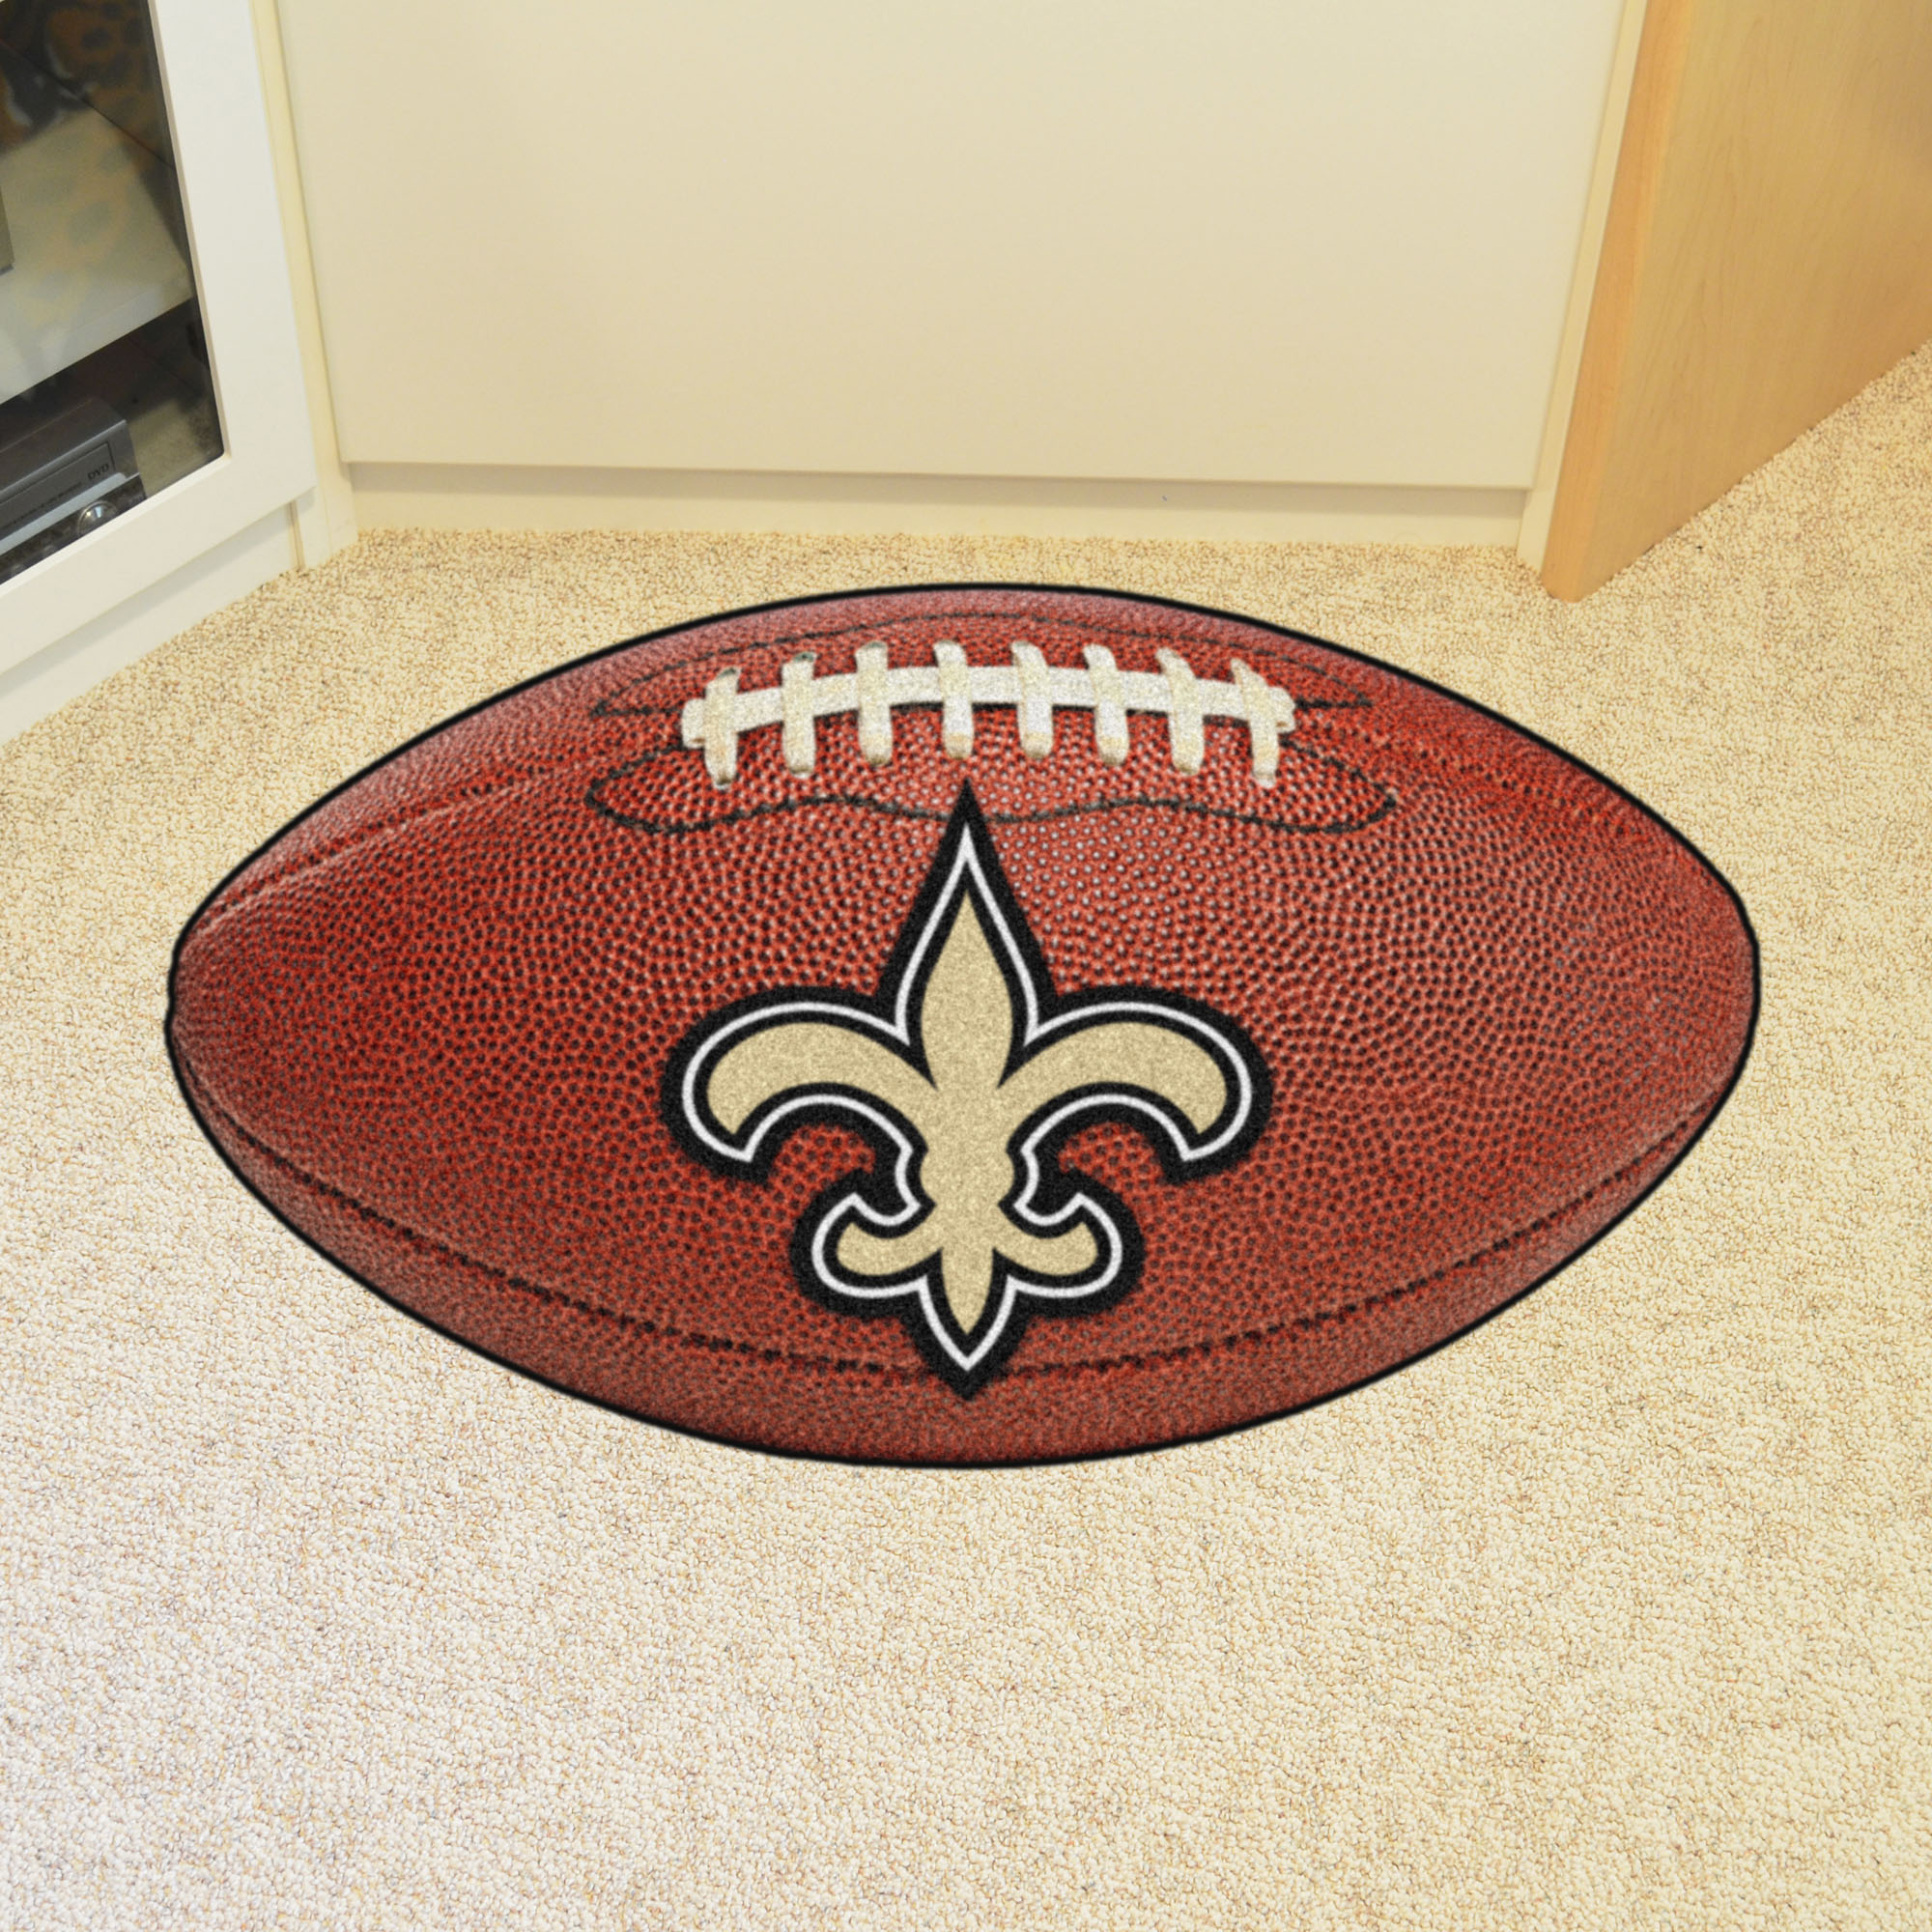 New Orleans Saints Ball Shaped Area Rugs